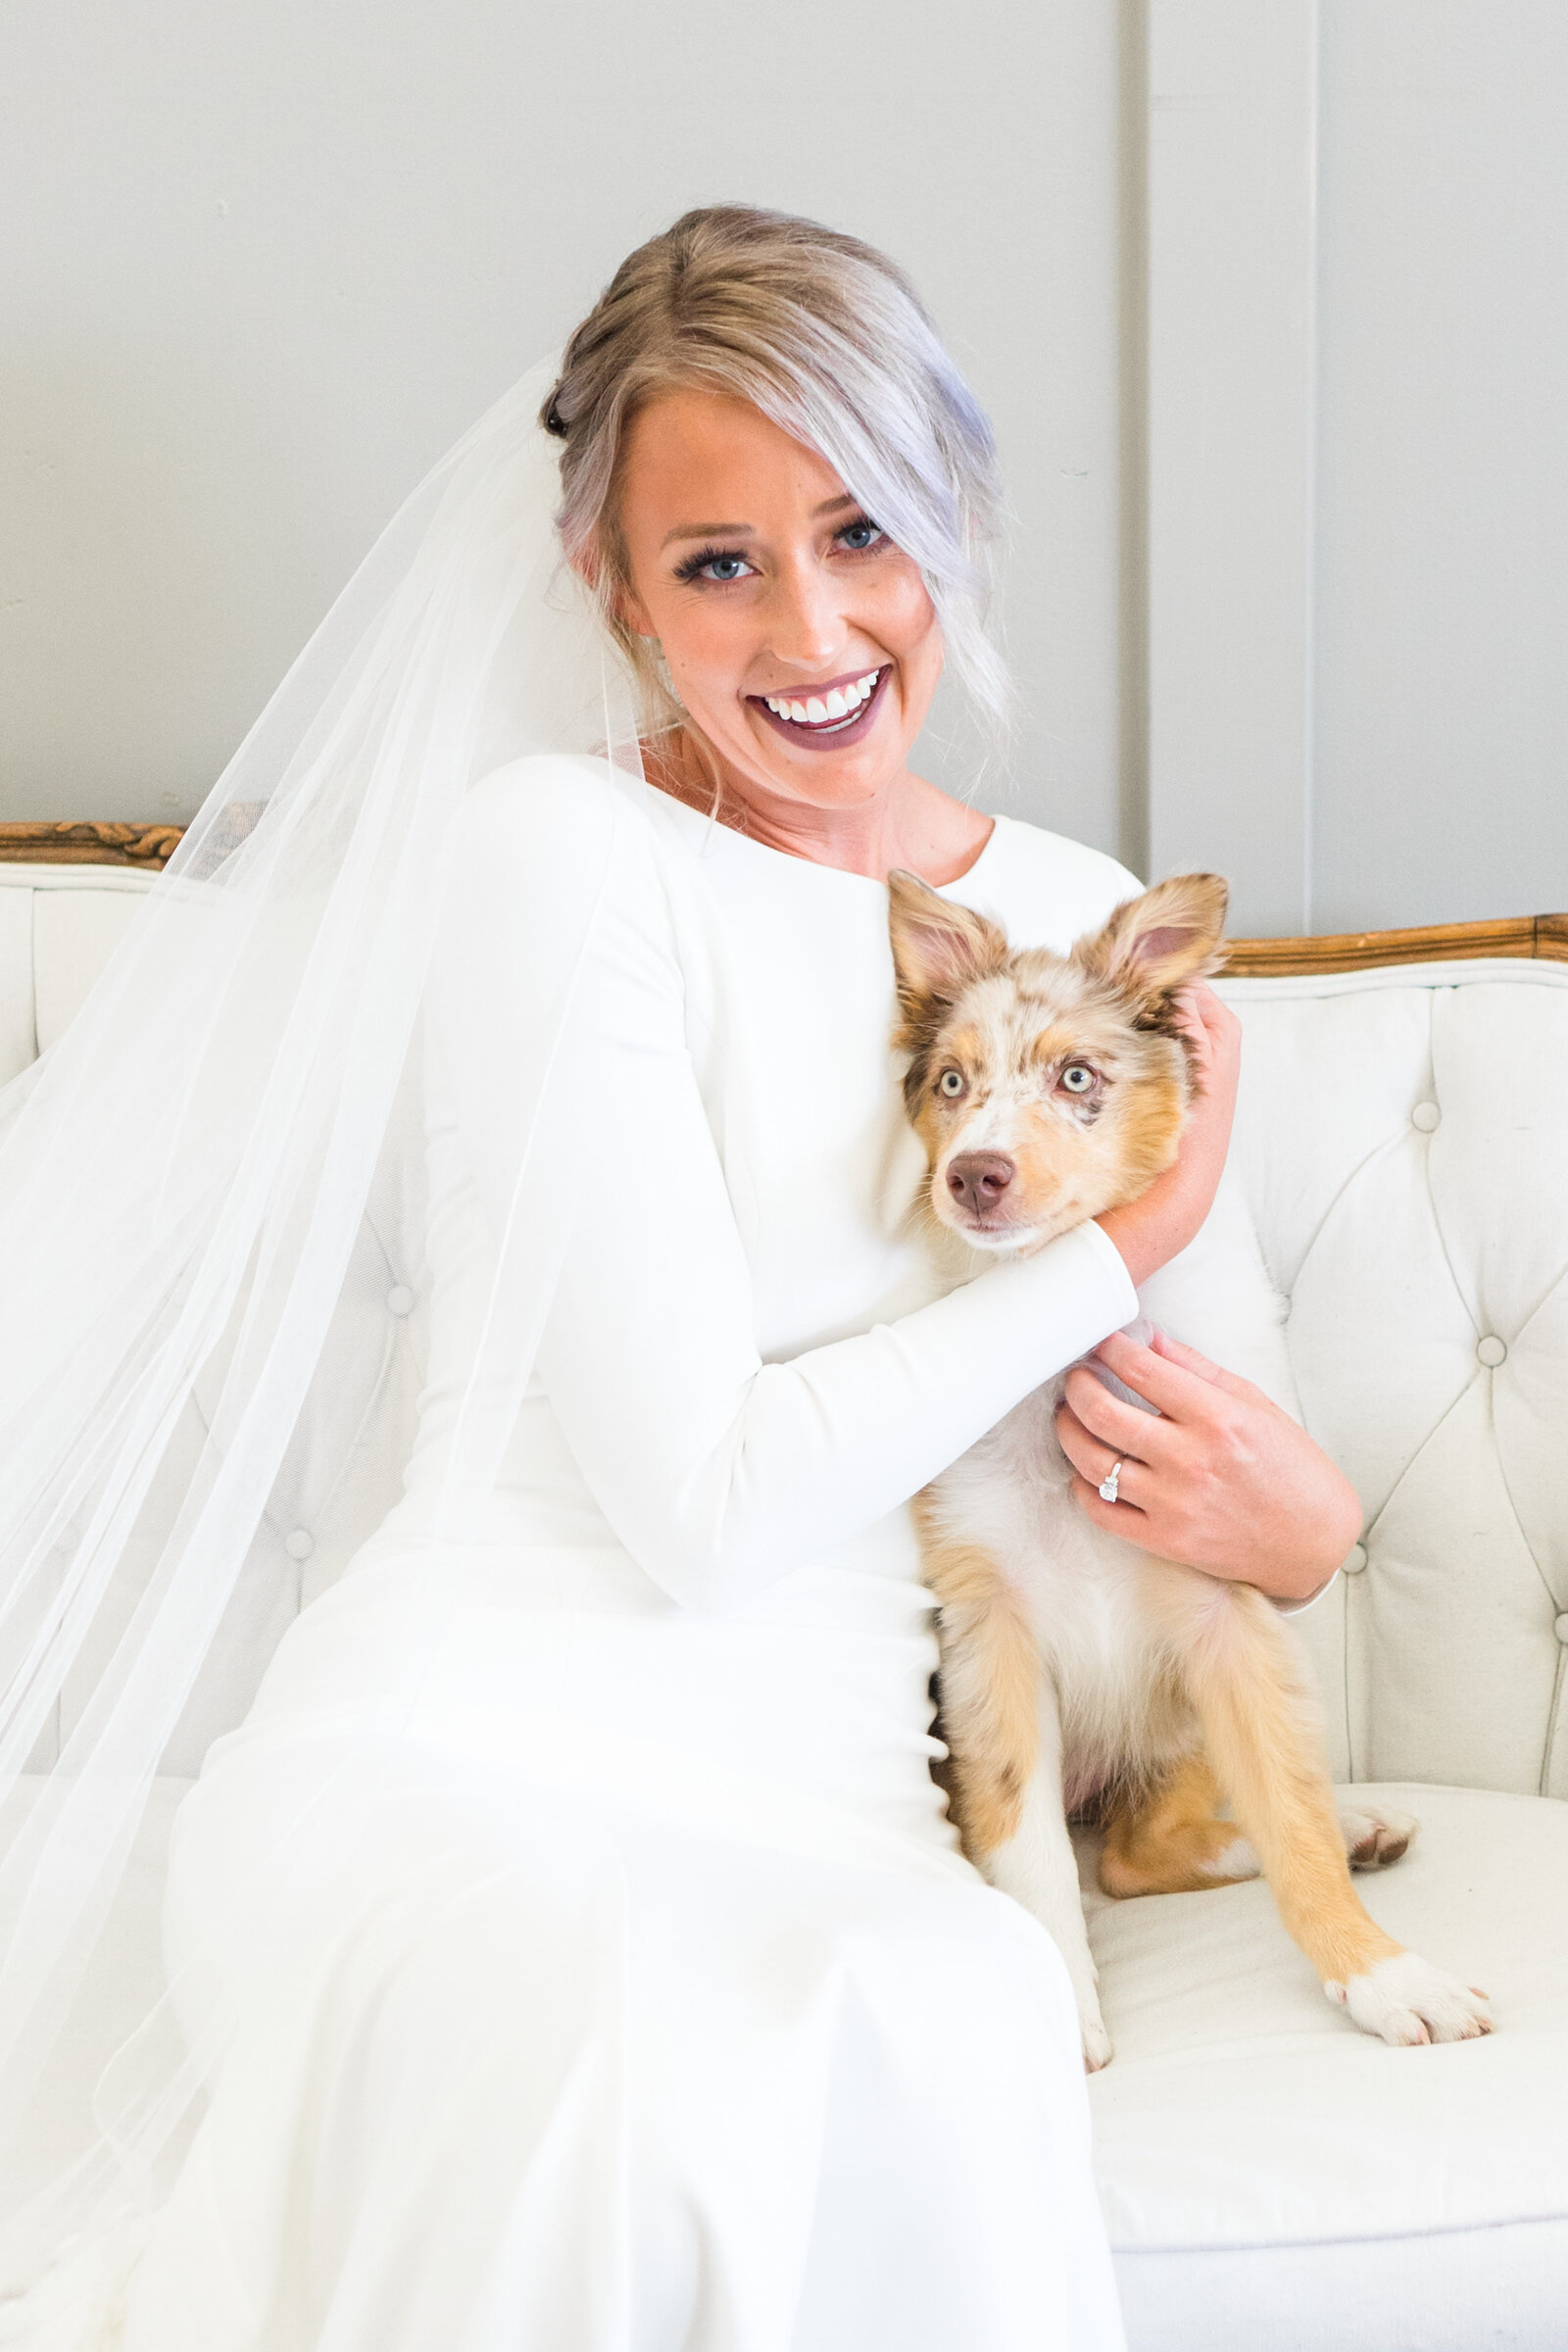 Bride sitting on couch with puppy